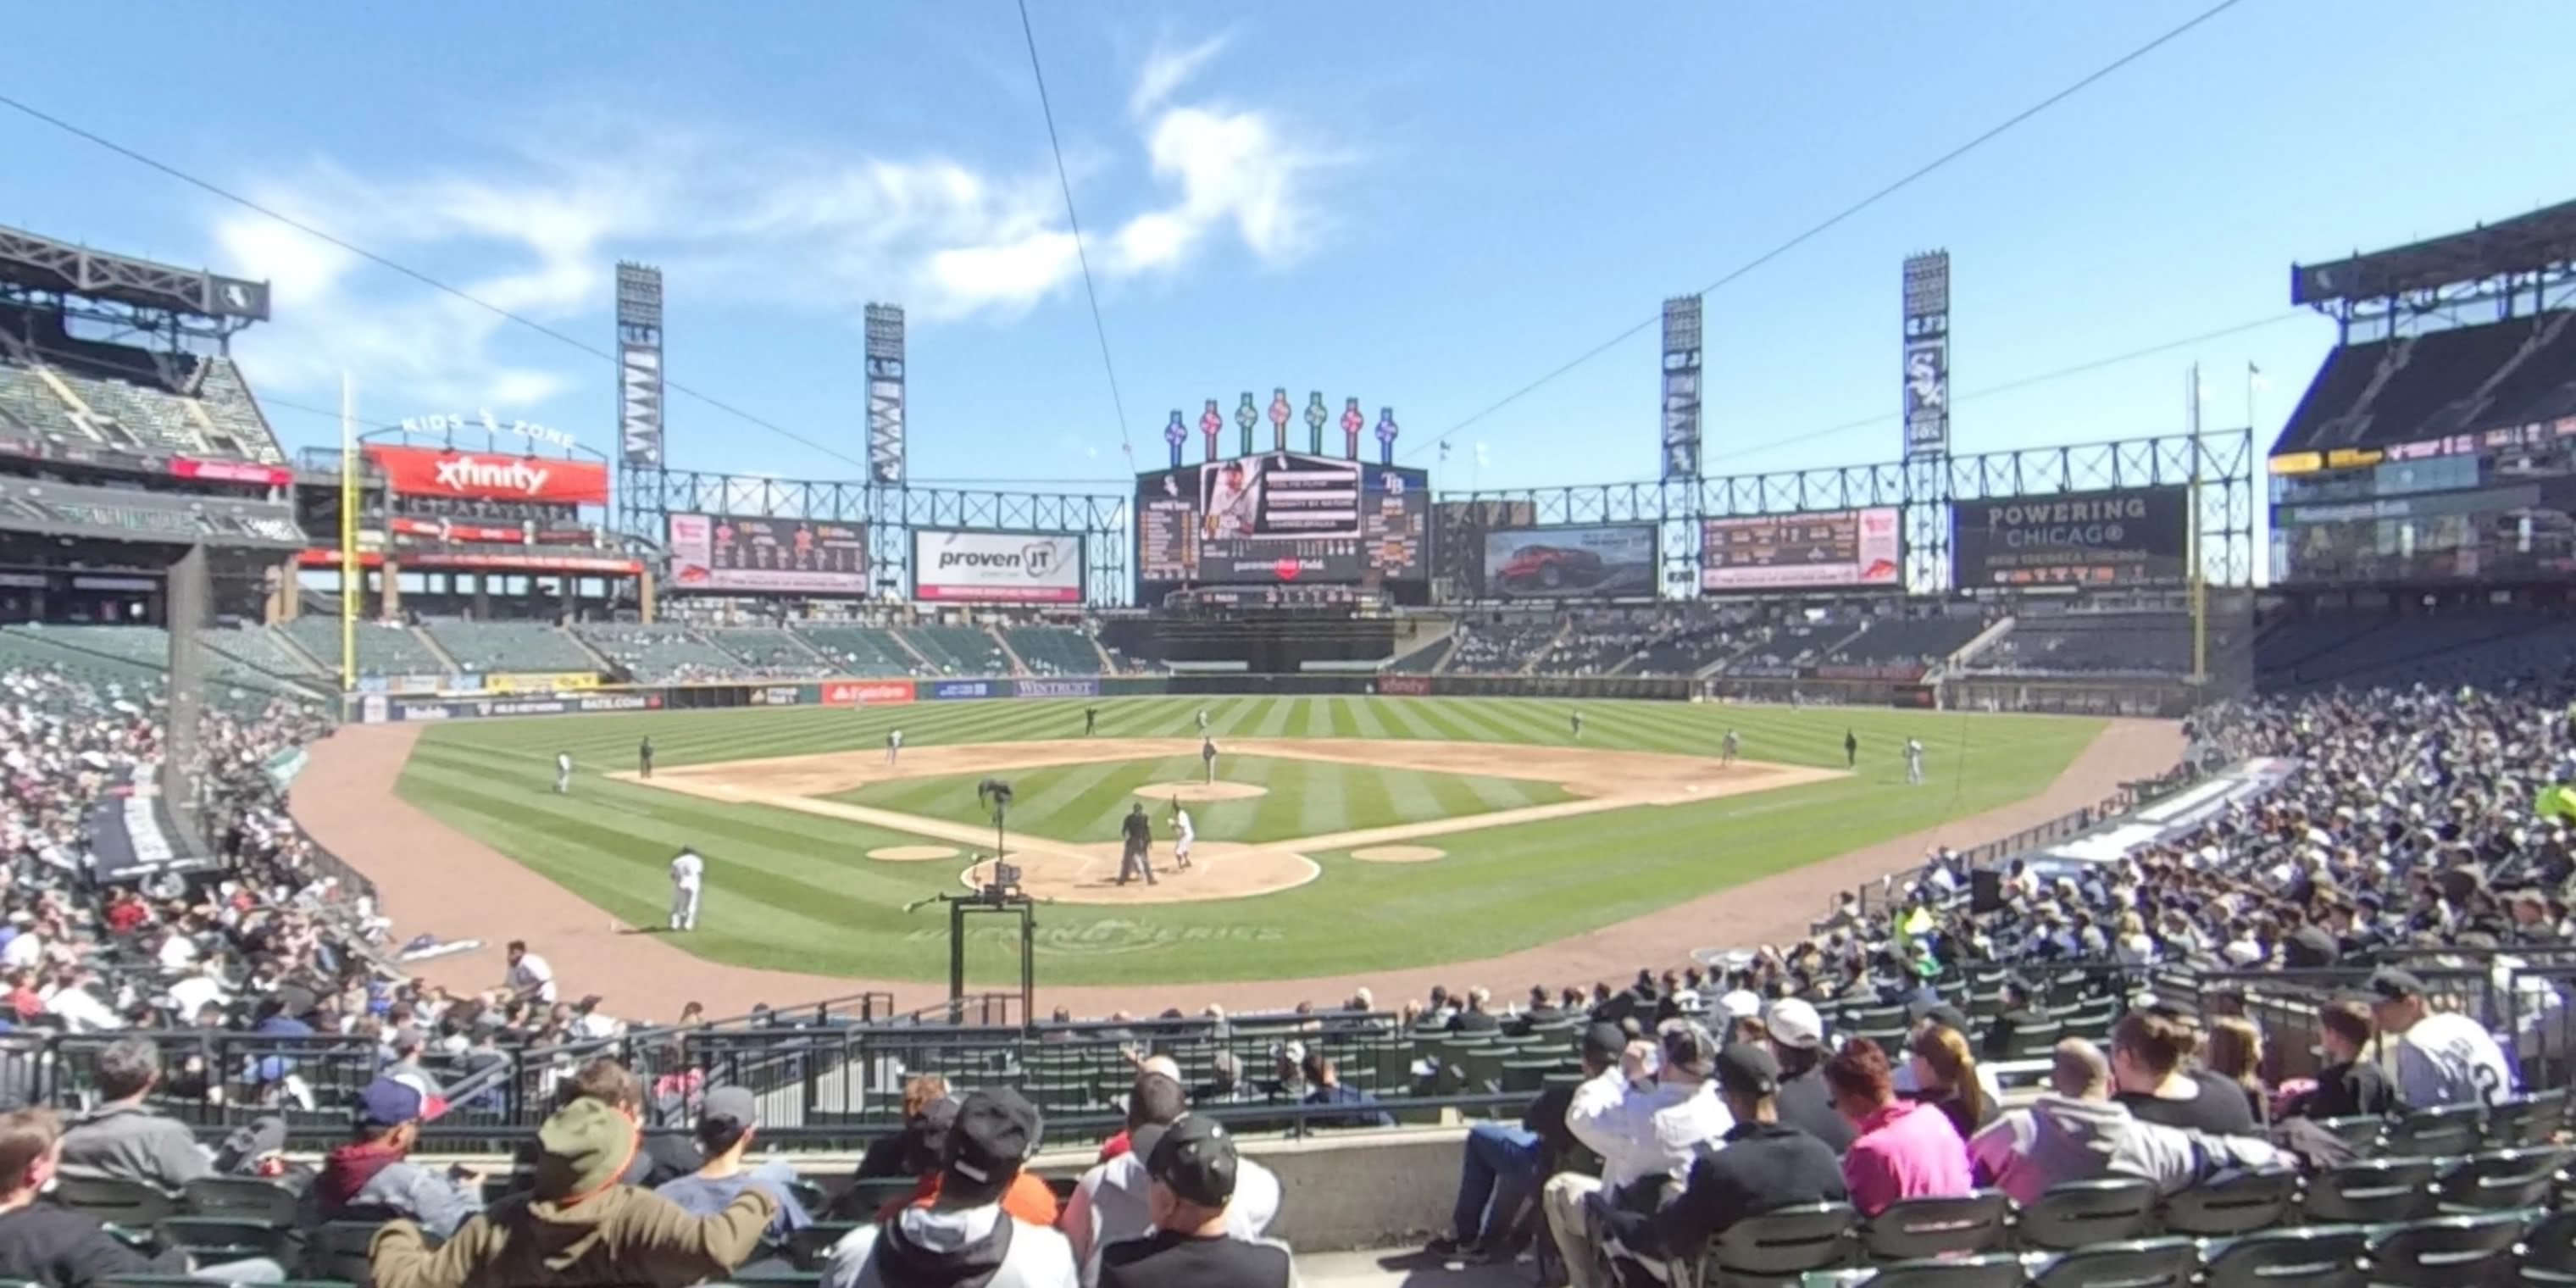 section 132 panoramic seat view  - guaranteed rate field